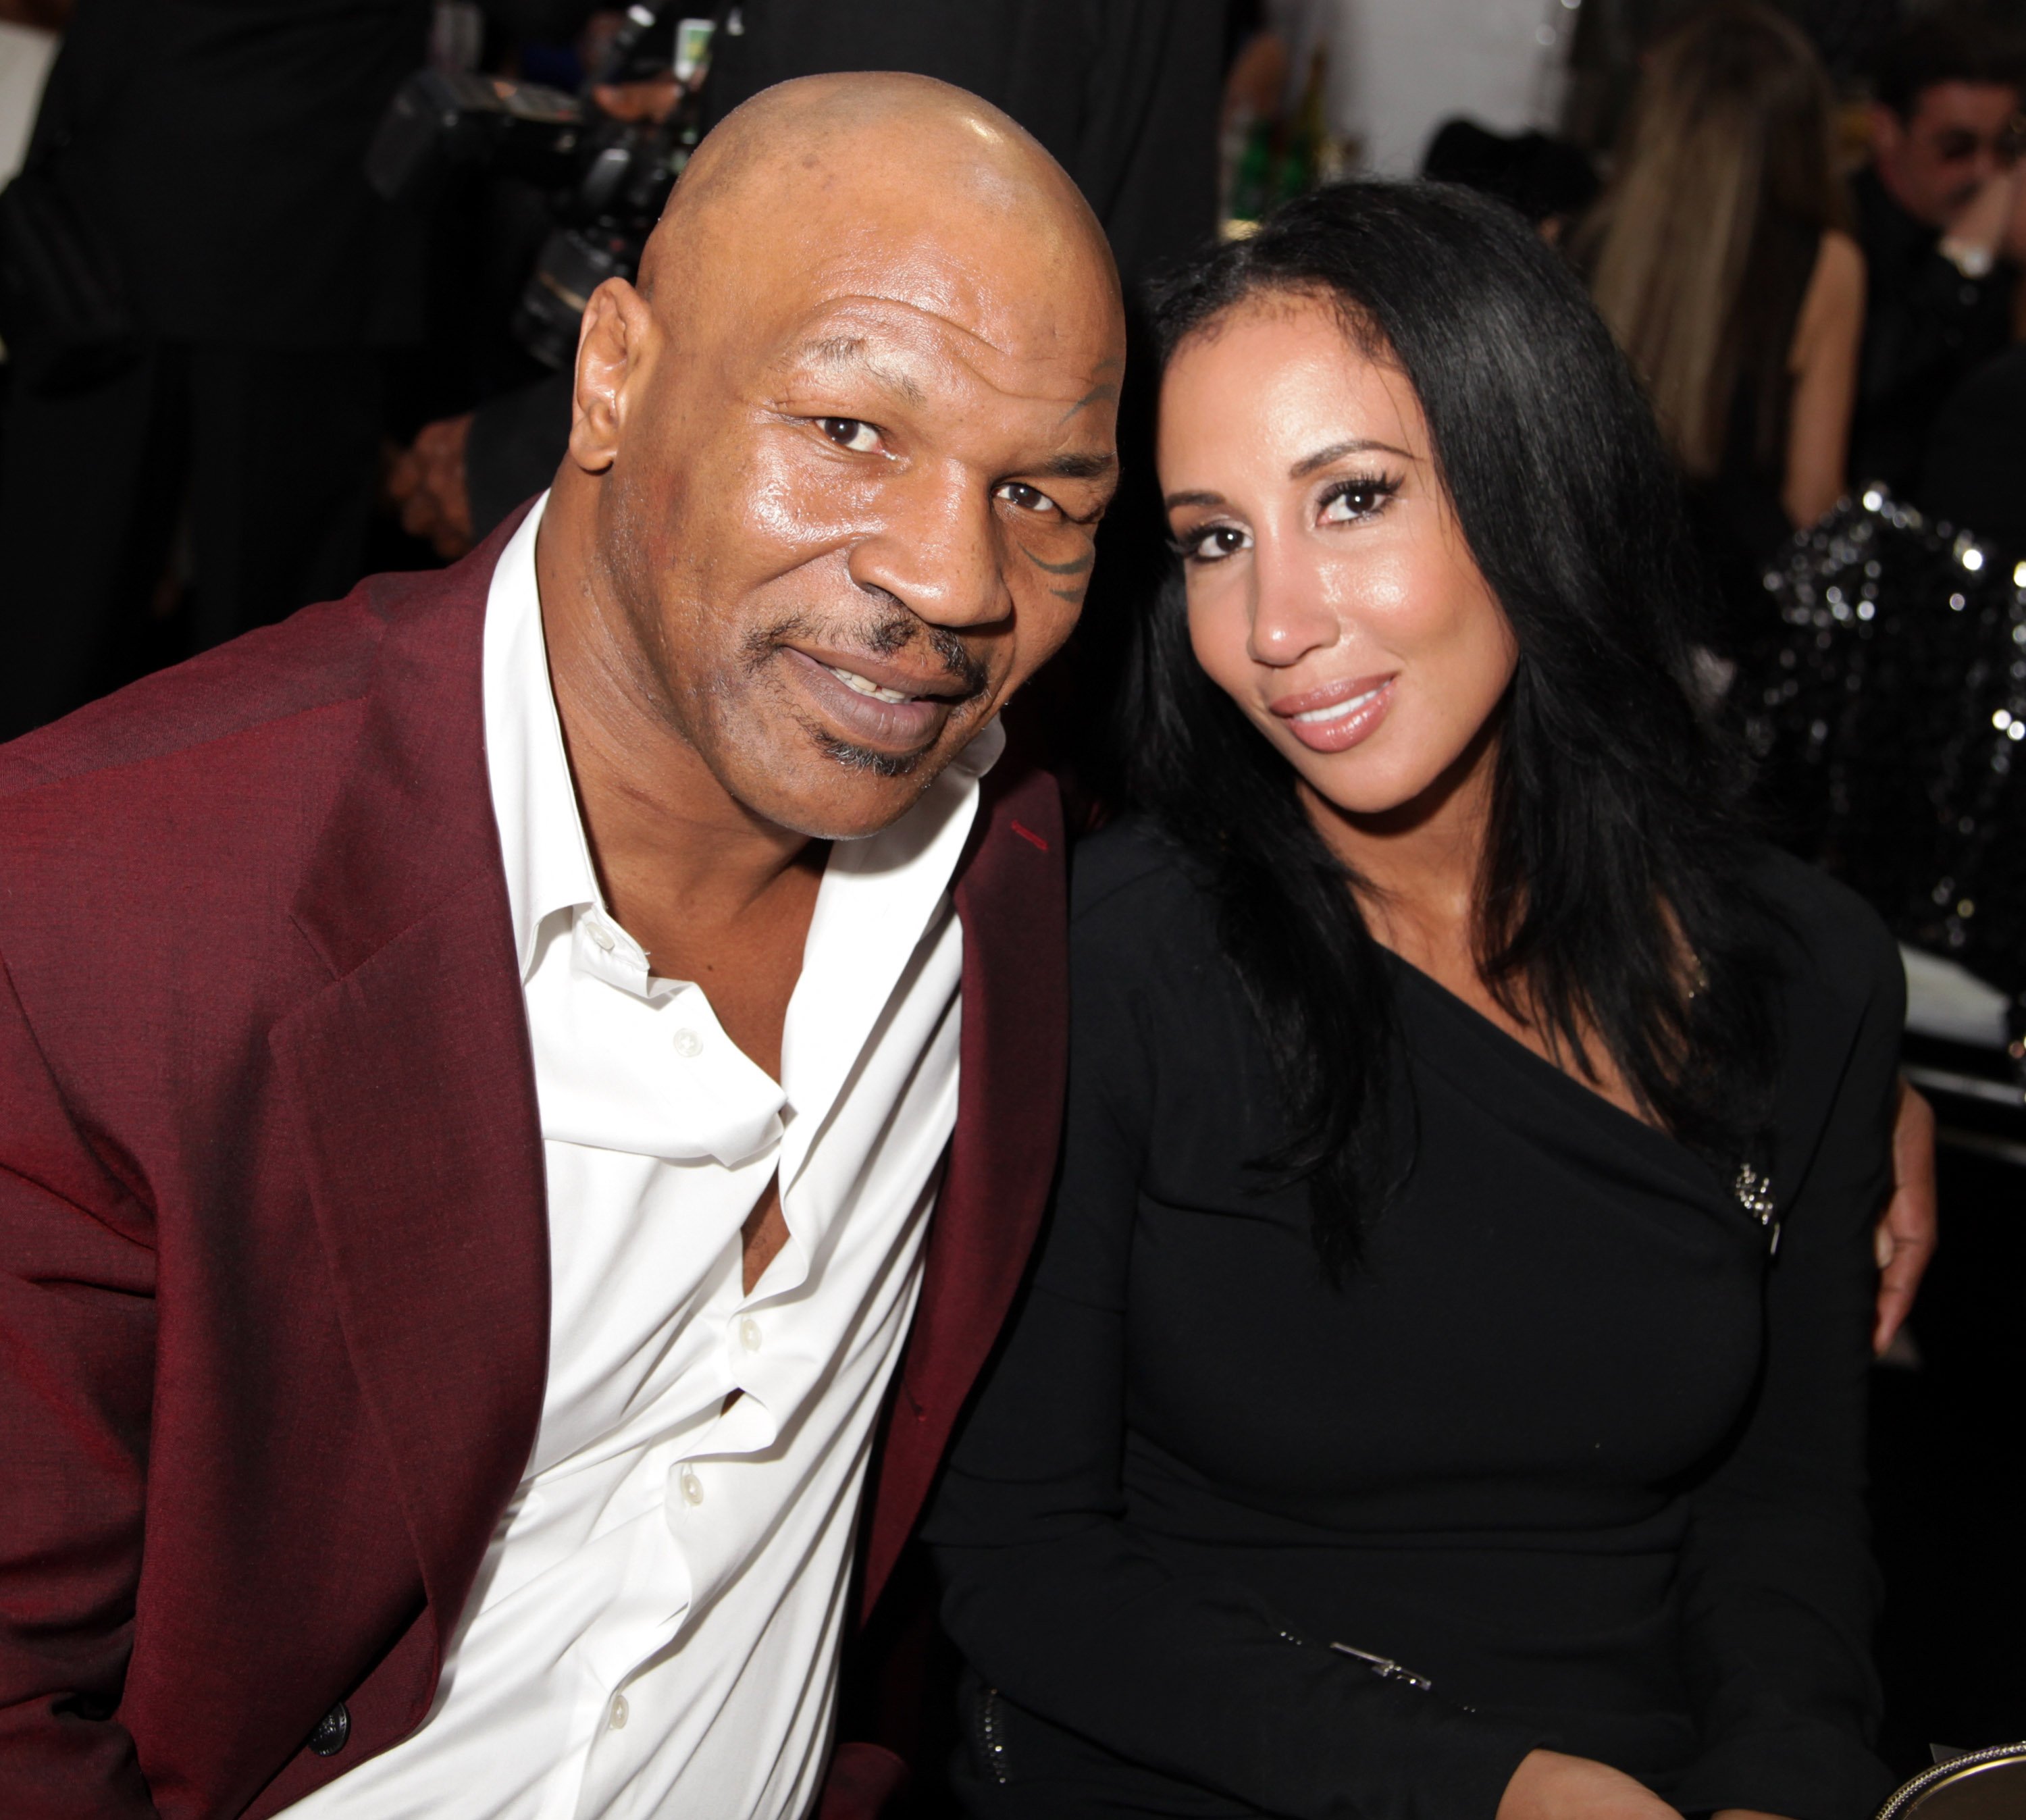 Mike Tyson and his wife Lakiha 'Kiki' Spicer seated next to each other and posing for a photo at Academy Awards Viewing Party Benefiting Children Uniting Nations